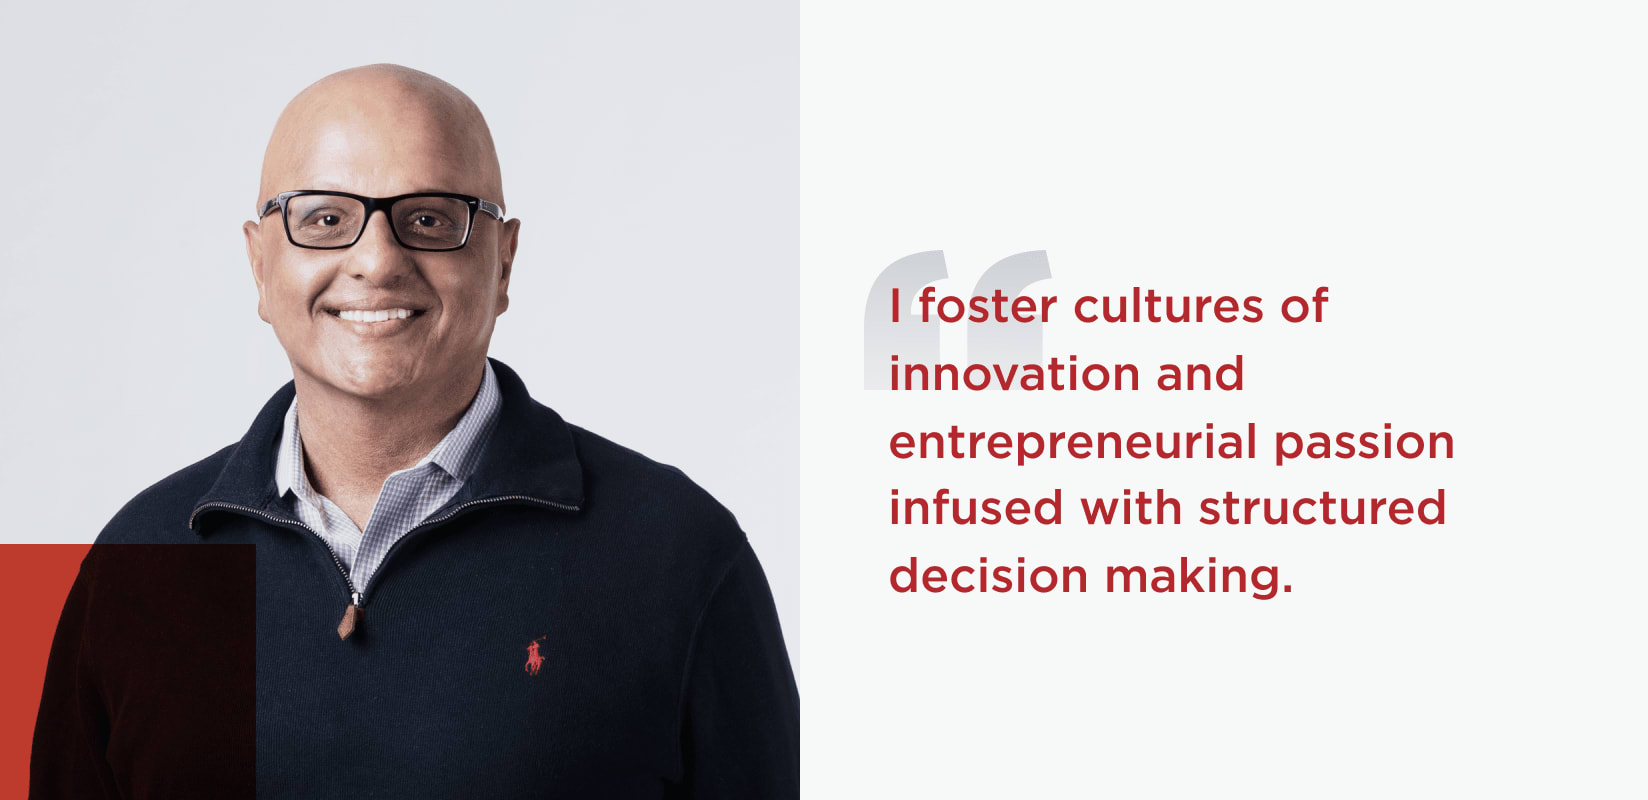 Decorative headshot of Ping Identity Chief Financial Officer, Raj Dani, with the following quote 'I foster cultures of innovation and entrepreneurial passion infused with structured decision making.'